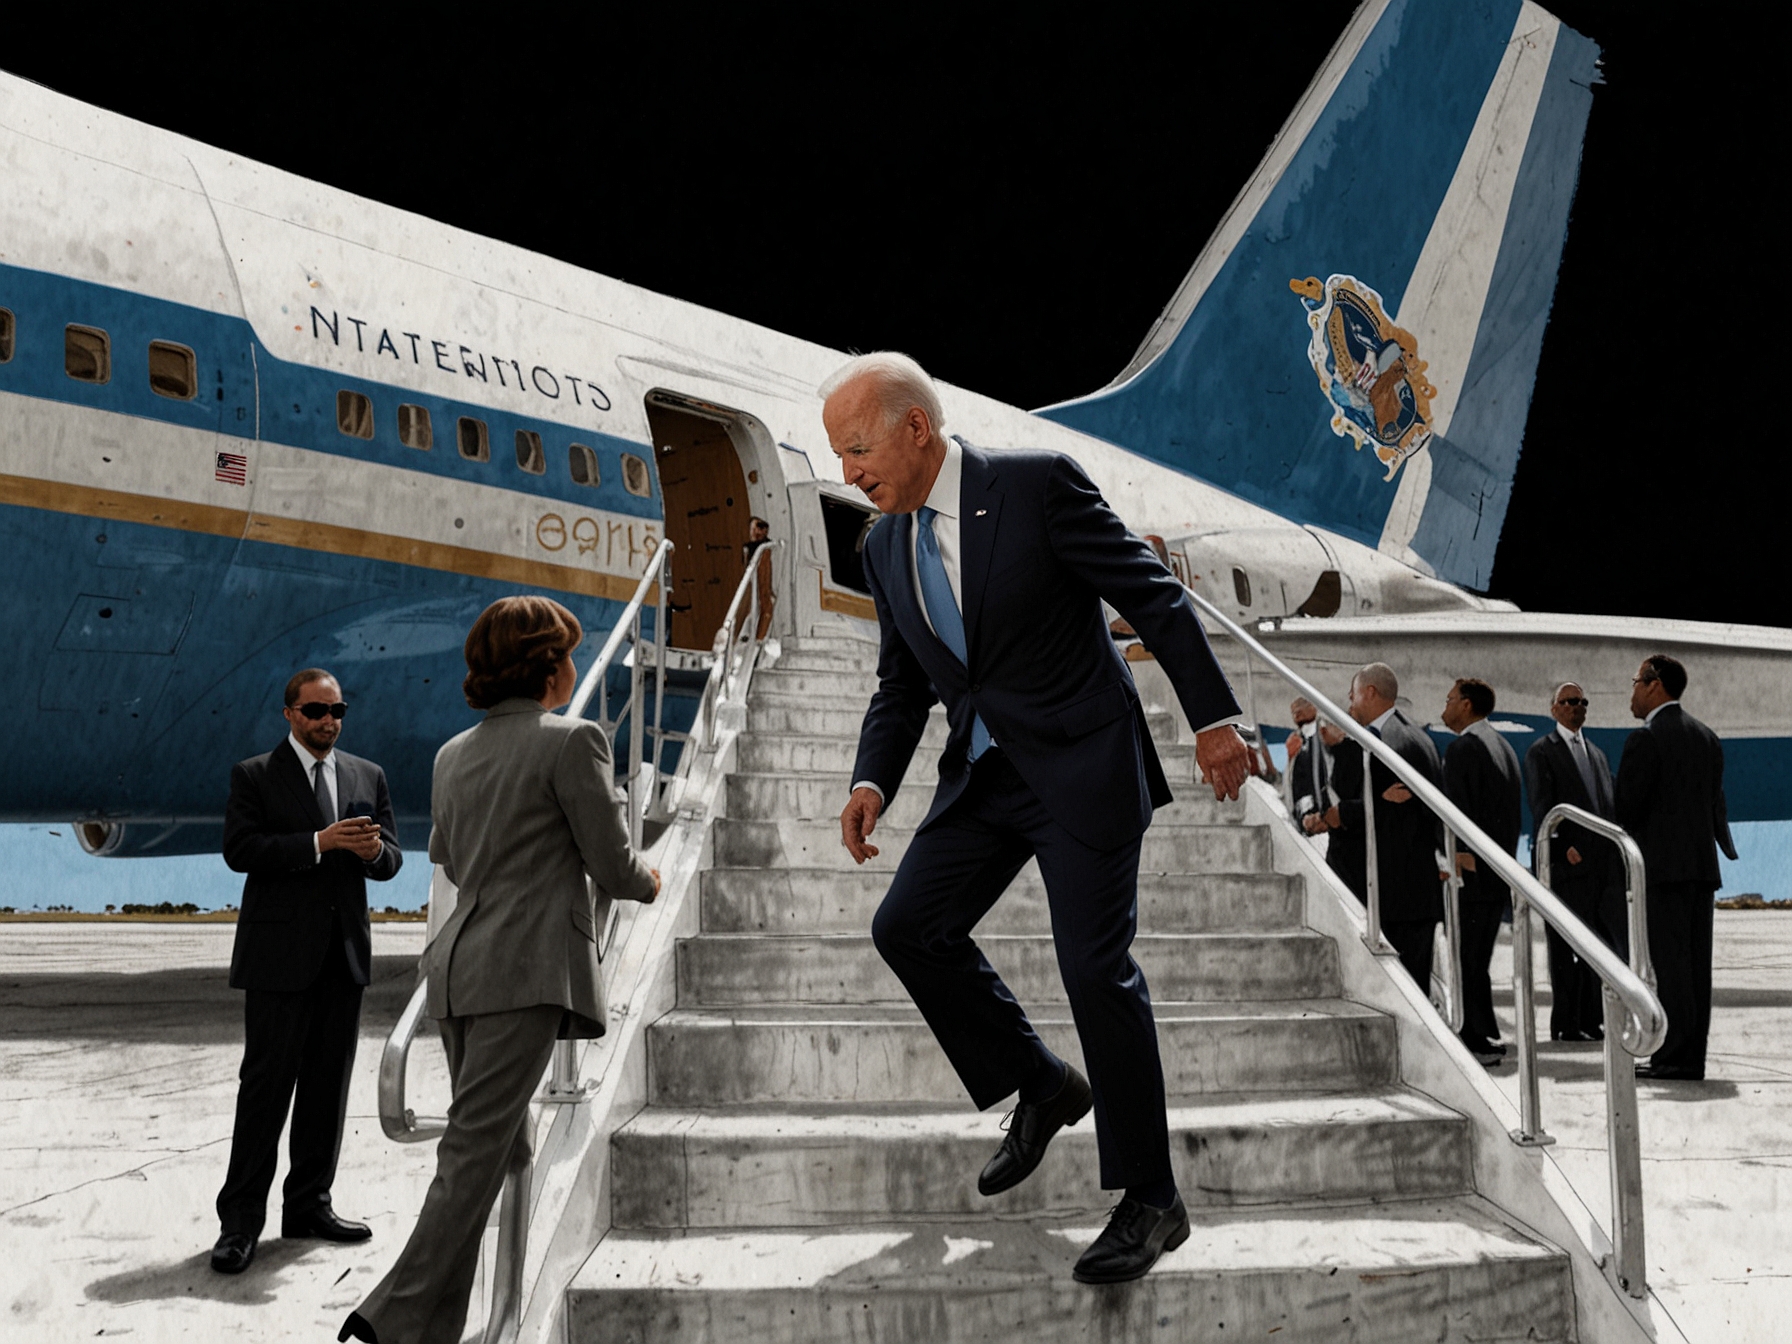 Illustration of President Joe Biden tripping on the stairs of Air Force One, capturing global media attention and raising concerns about his physical vigor and overall health.